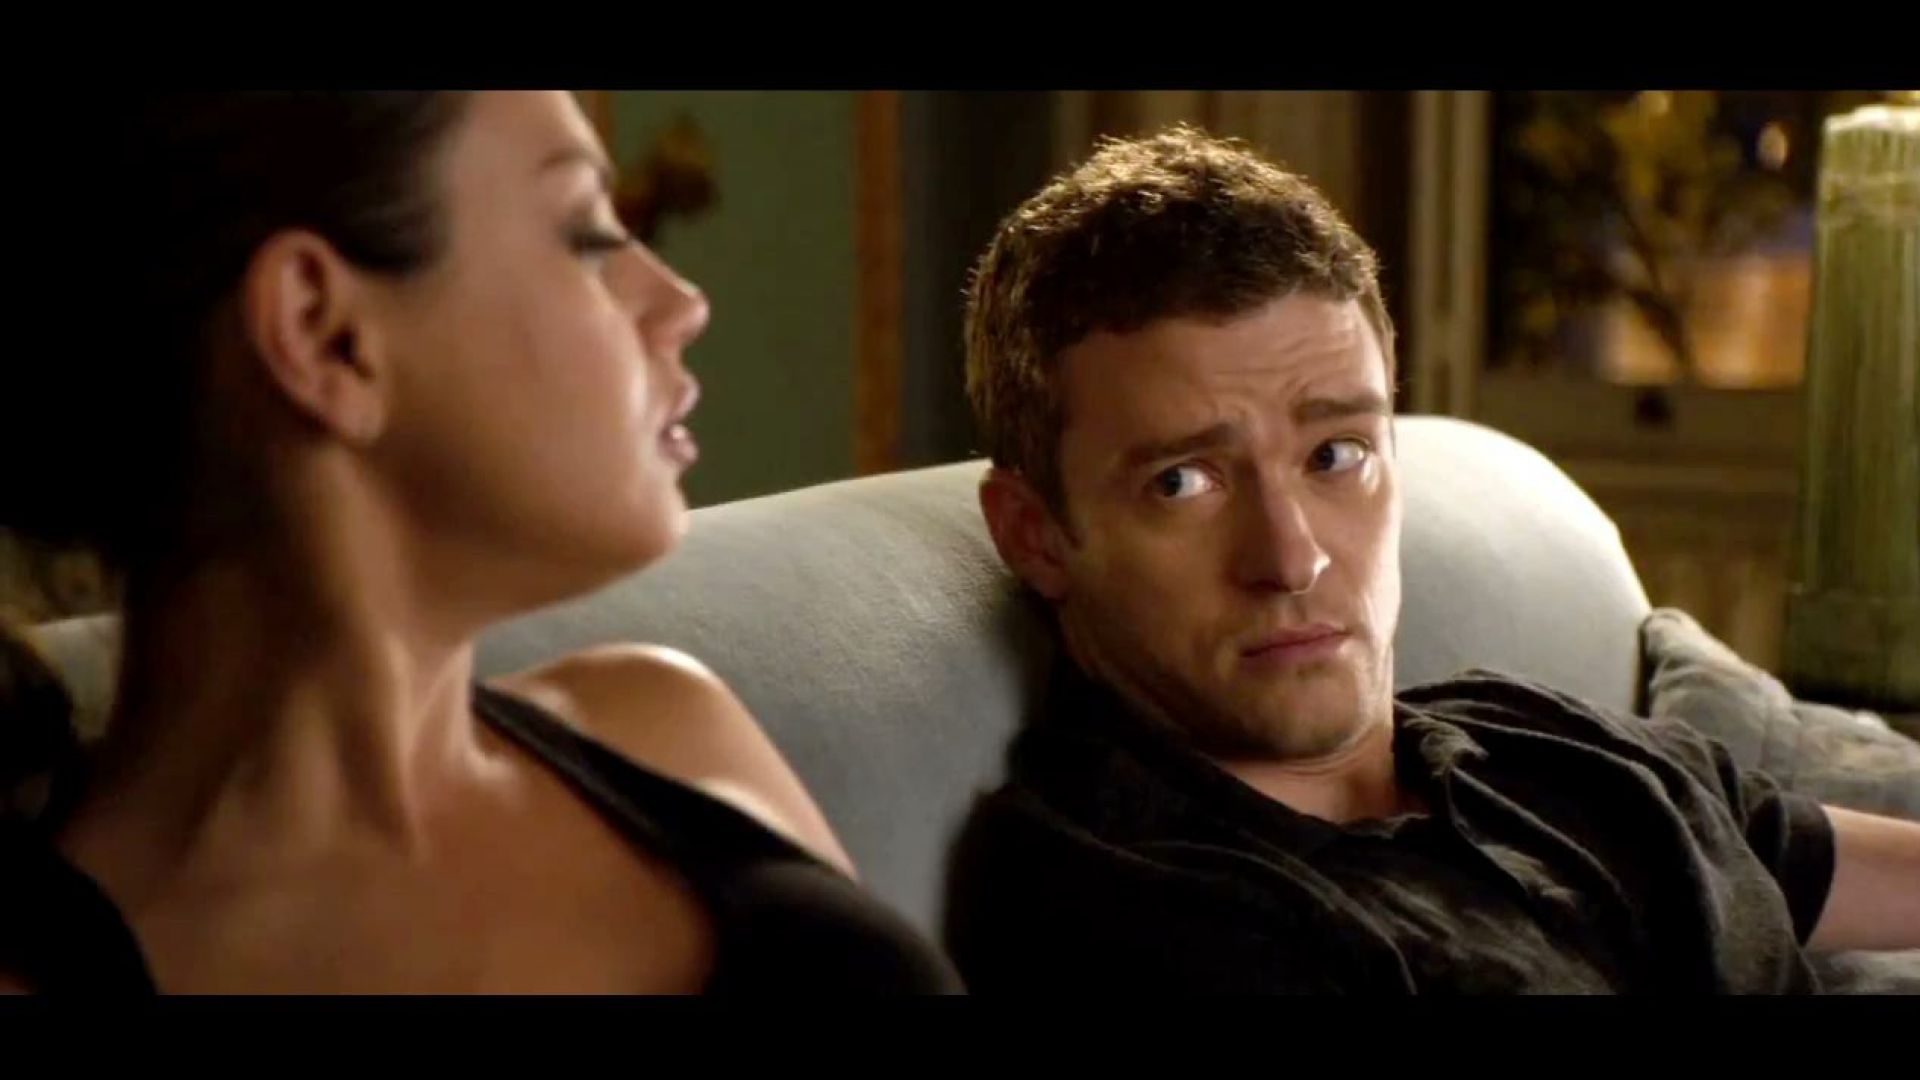 Say my name. Ie! Ah! I&#039;m done. Who have you been with? Friends with Benefits